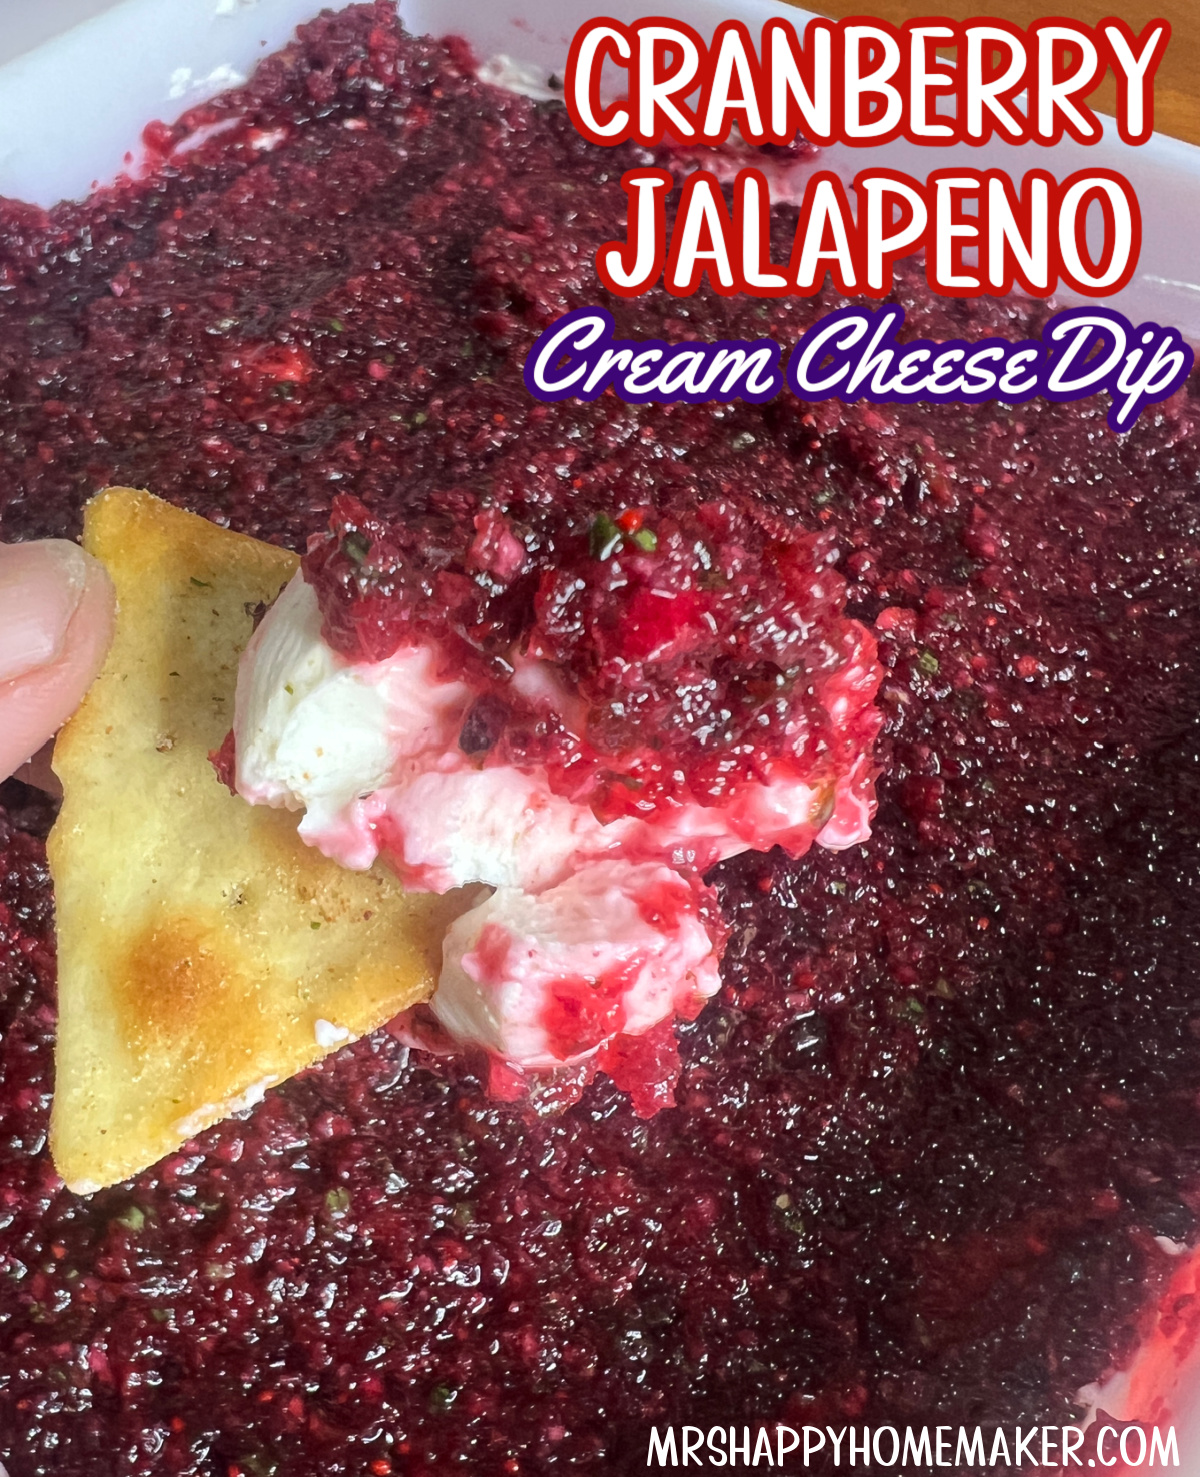 Cranberry Jalapeno Cream Cheese Dip on a cracker 